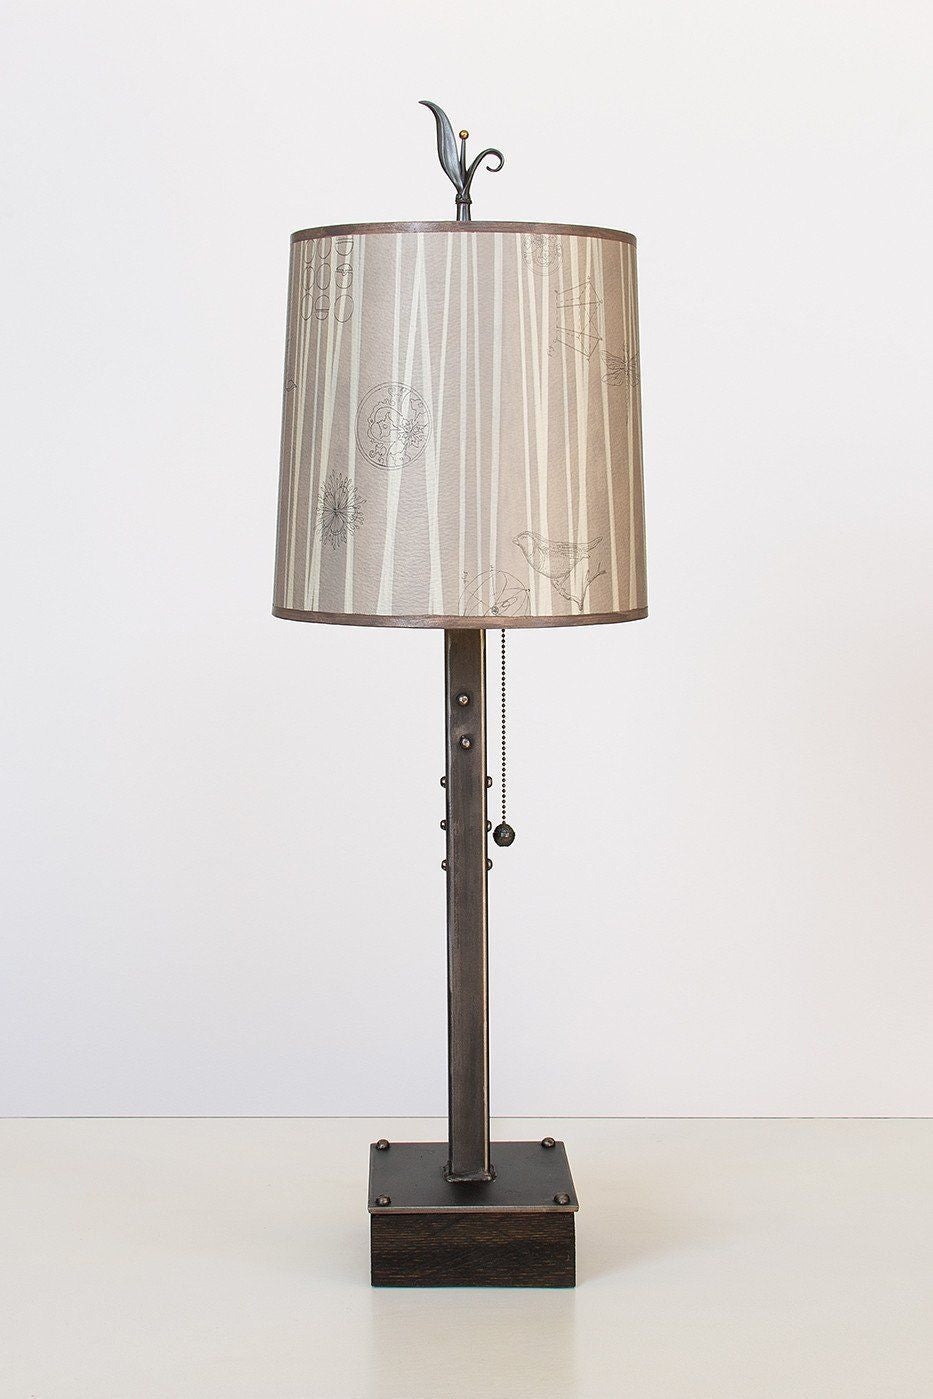 Janna Ugone &amp; Co Table Lamps Steel Table Lamp on Wood with Medium Drum Shade in Birch Lines